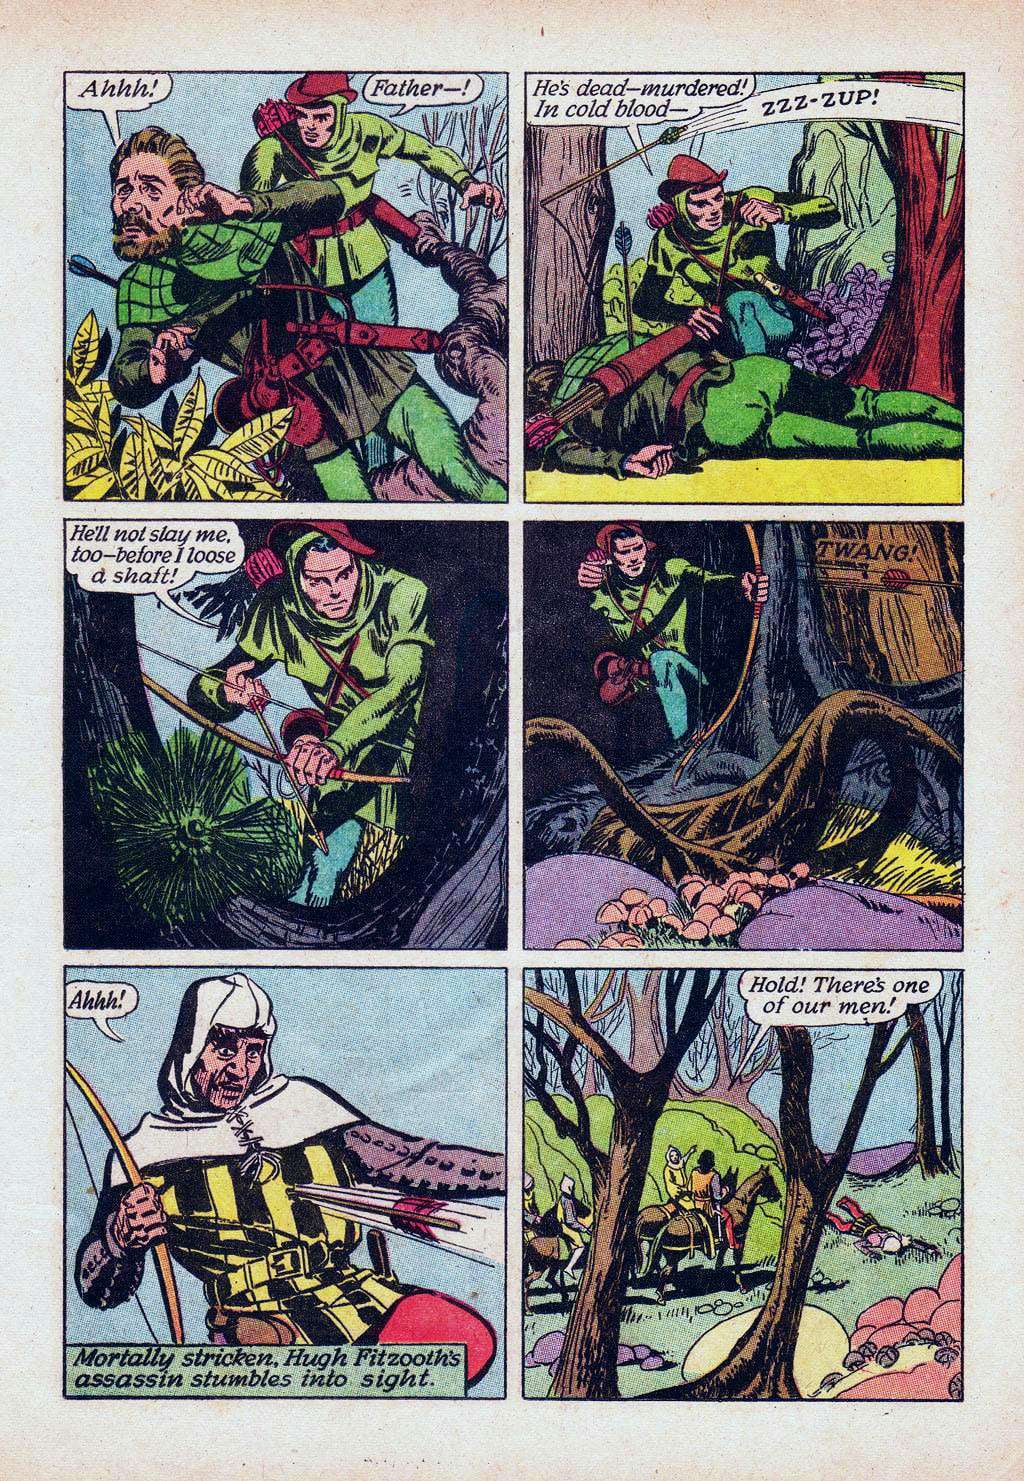 Page from the Dell Comics adaptation